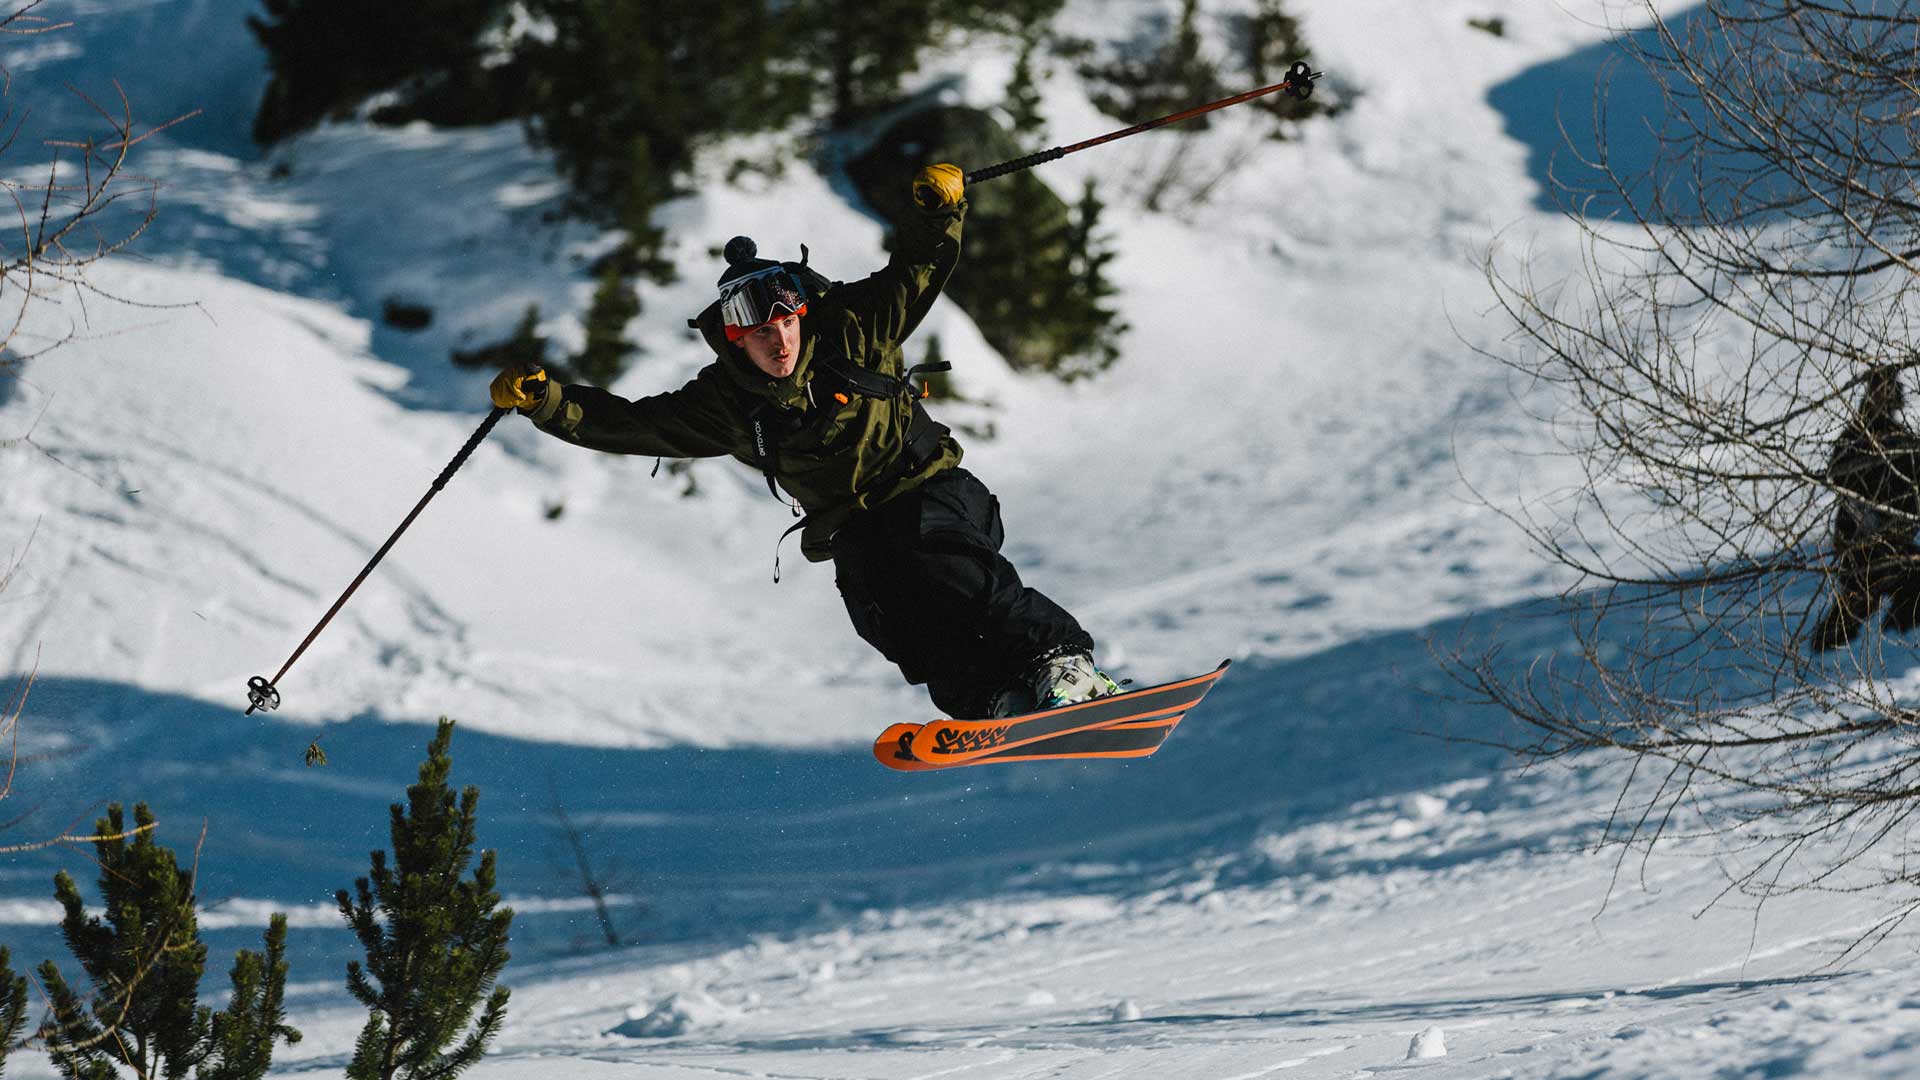 How to Freeride | Our Expert’s Top Tips On Finding The Most Creative Line Down The Mountain